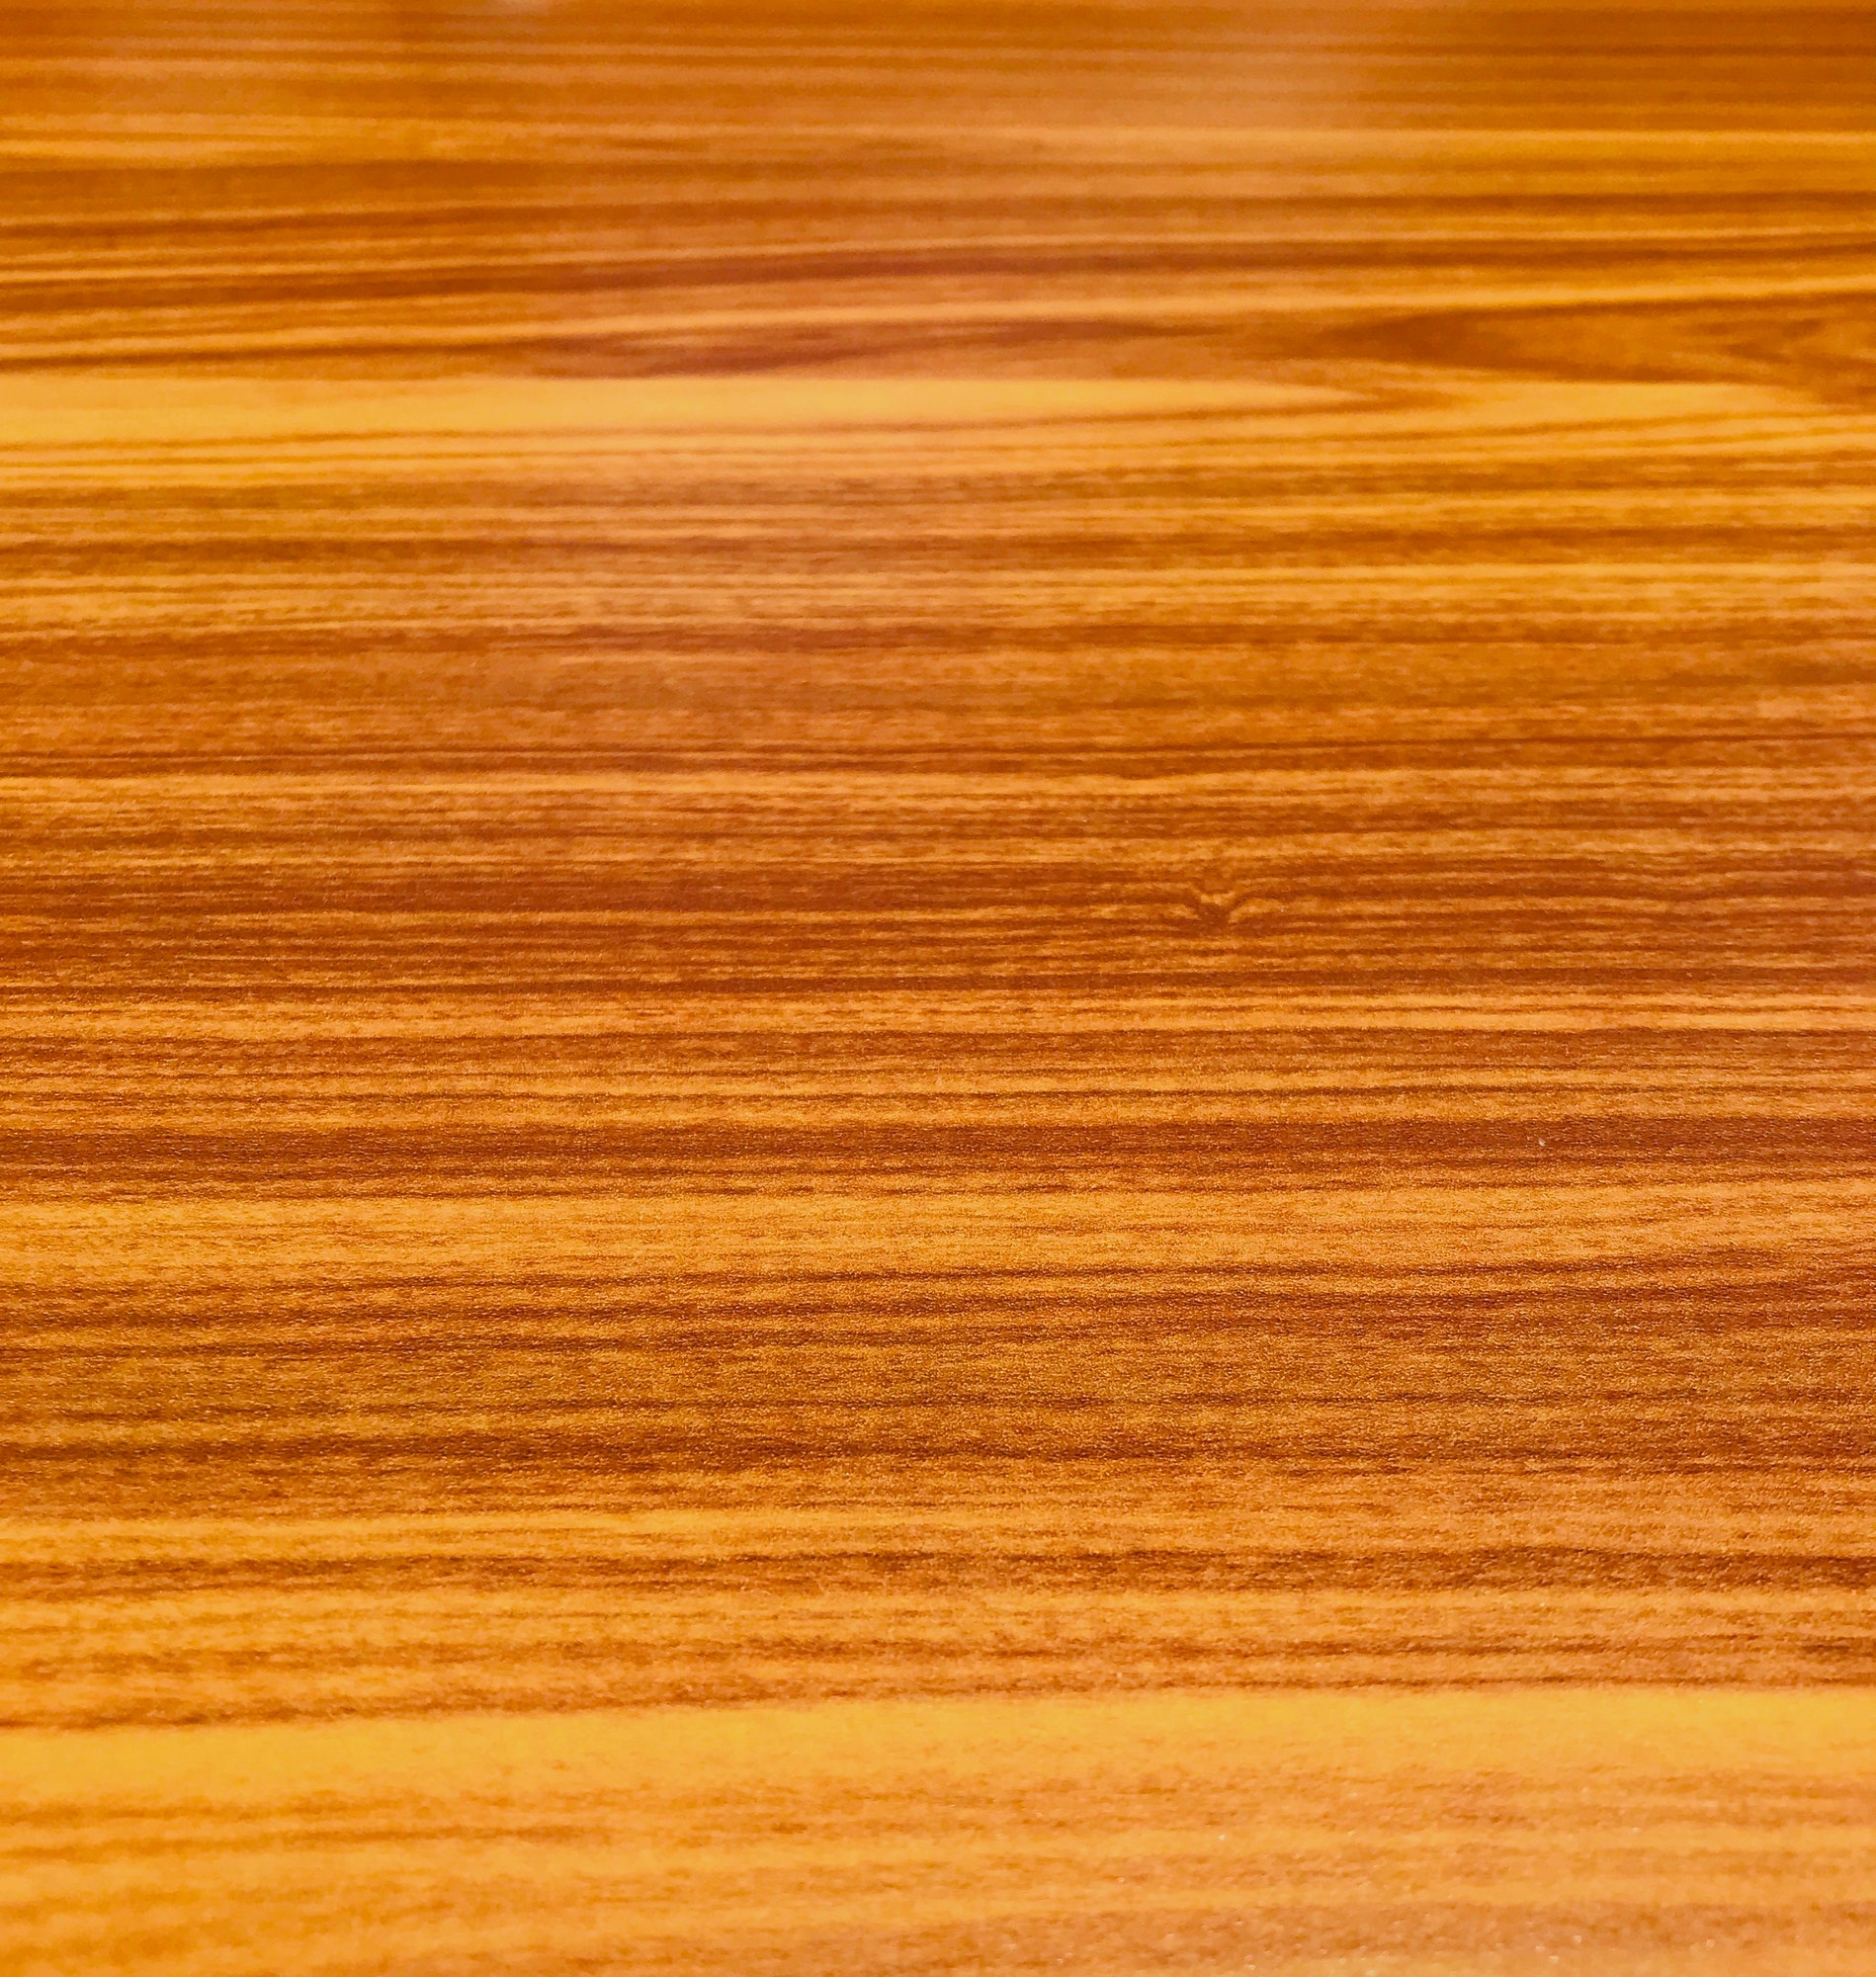 Golden, honey, cherry wood grain background perfect for a wallpaper or a text or image overlay